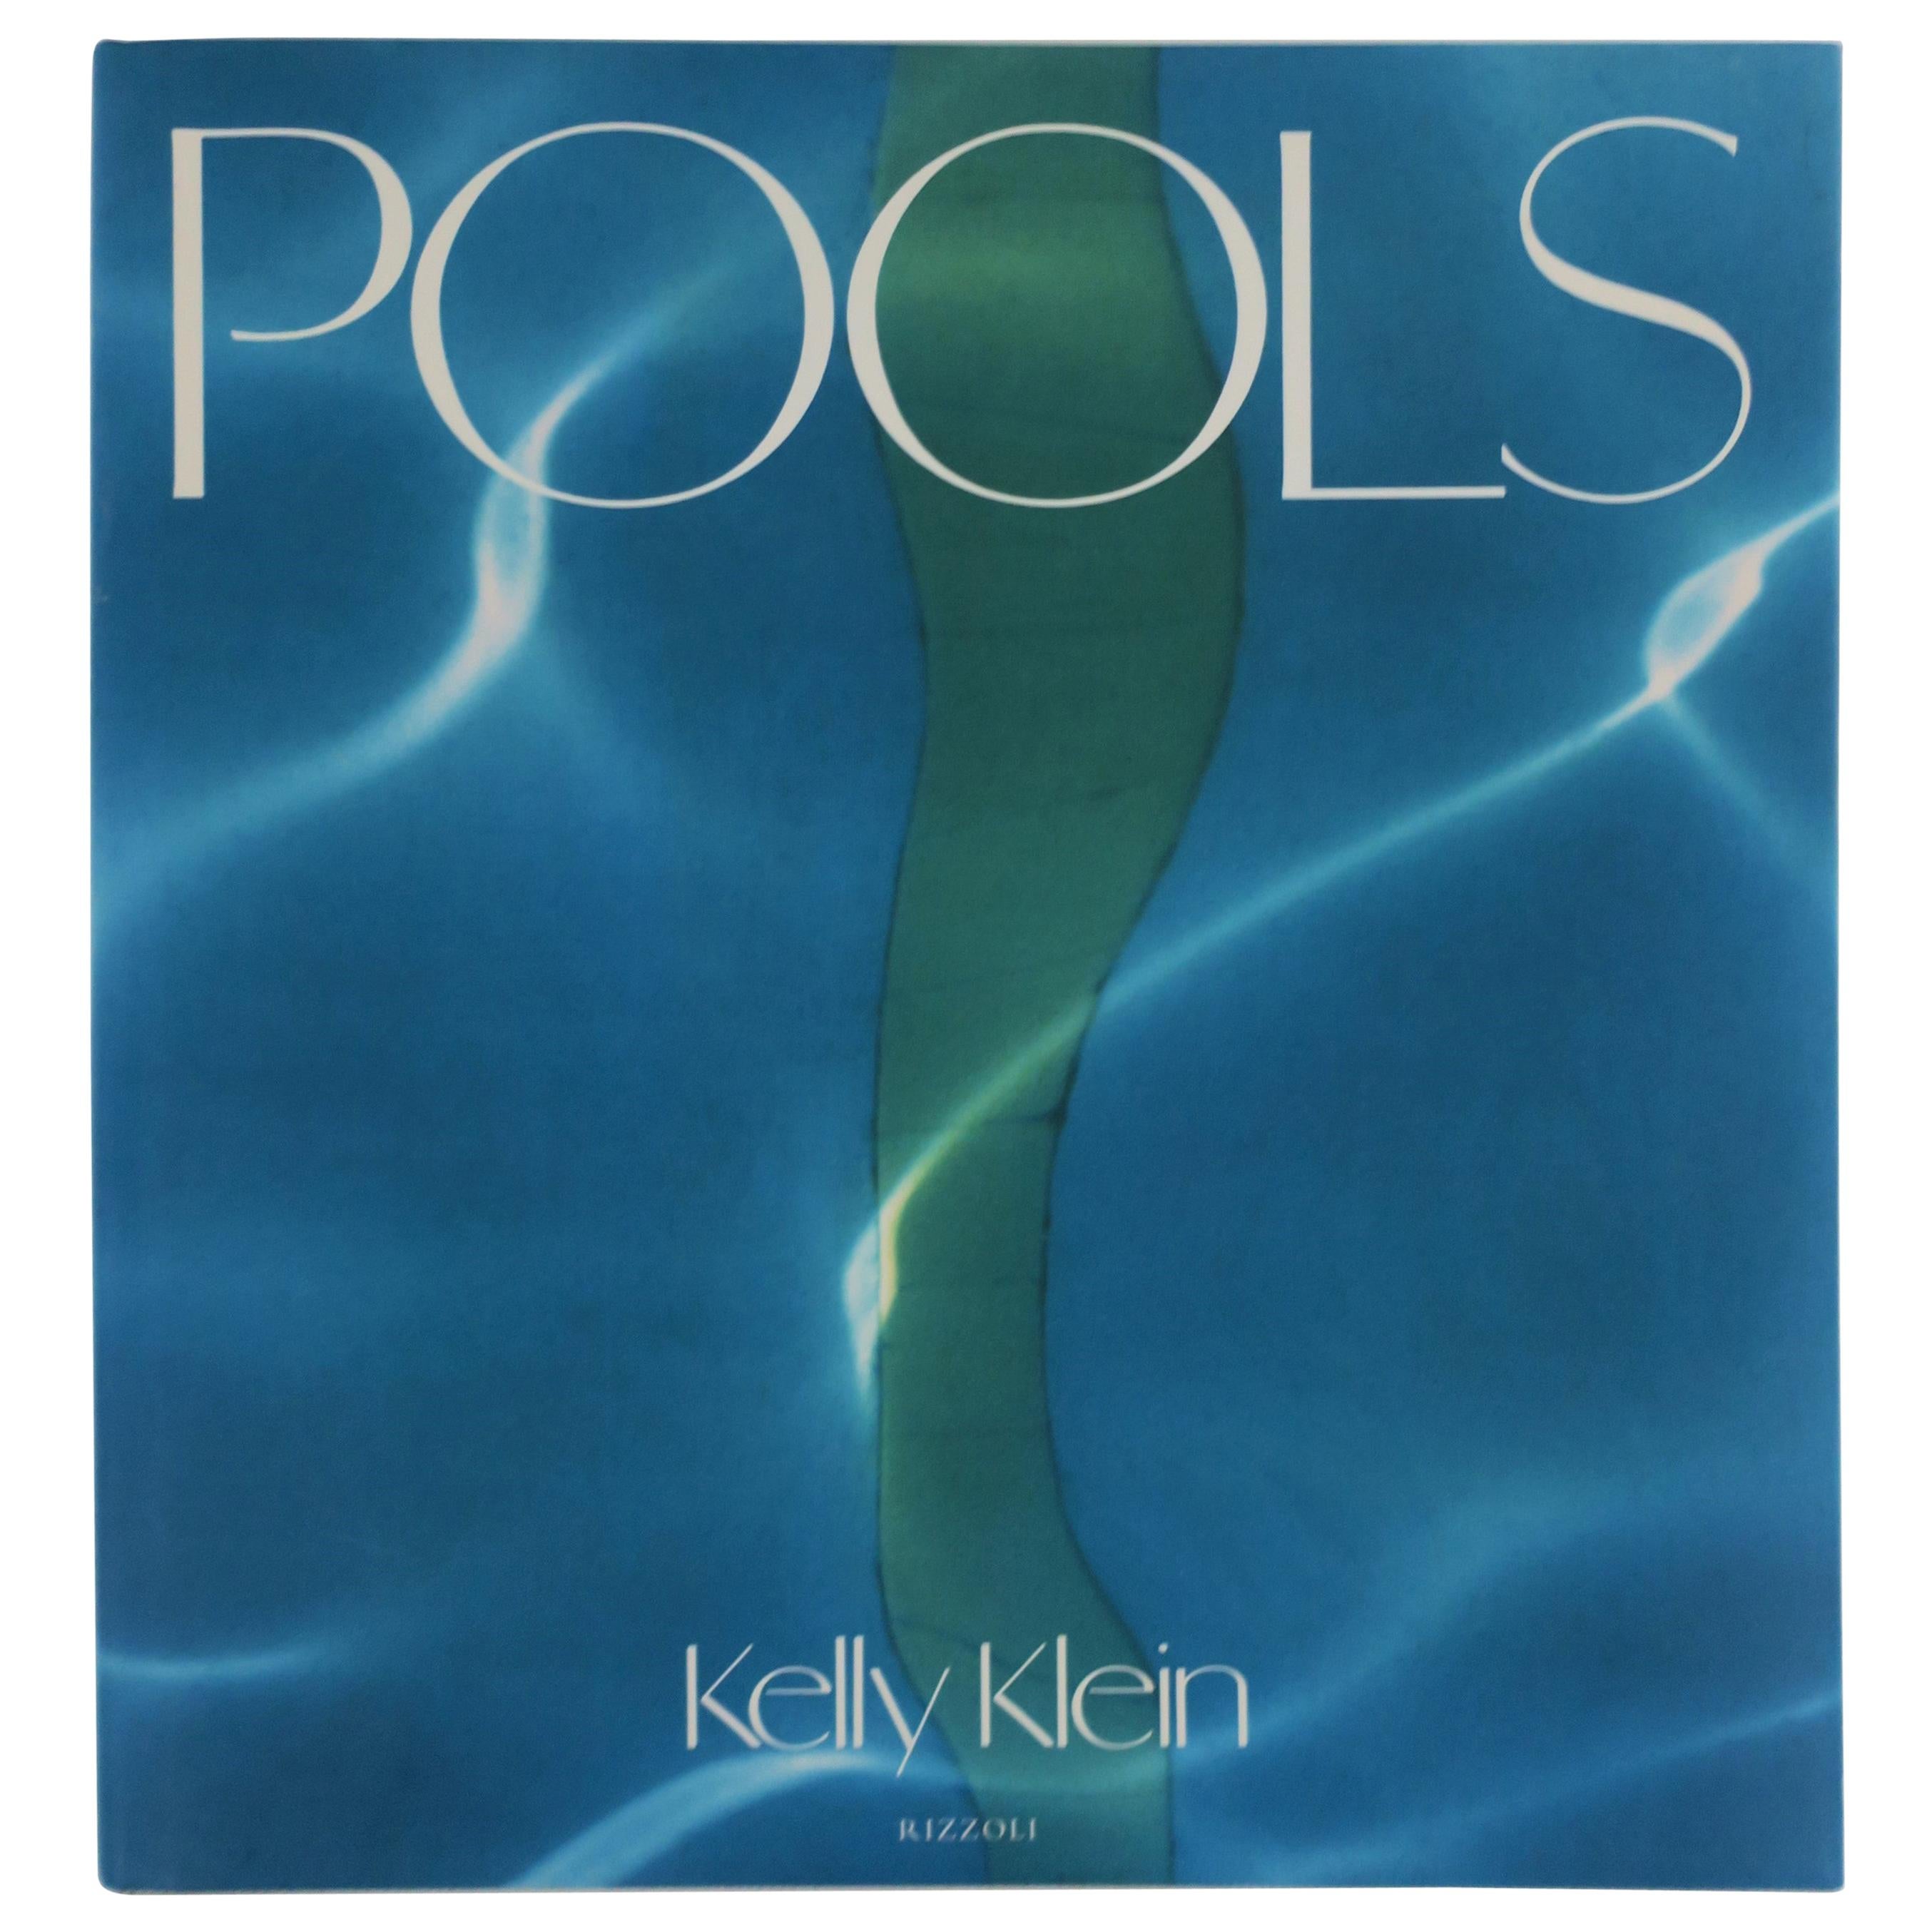 Pools by Kelly Klein an Architecture Coffee Table or Library Book